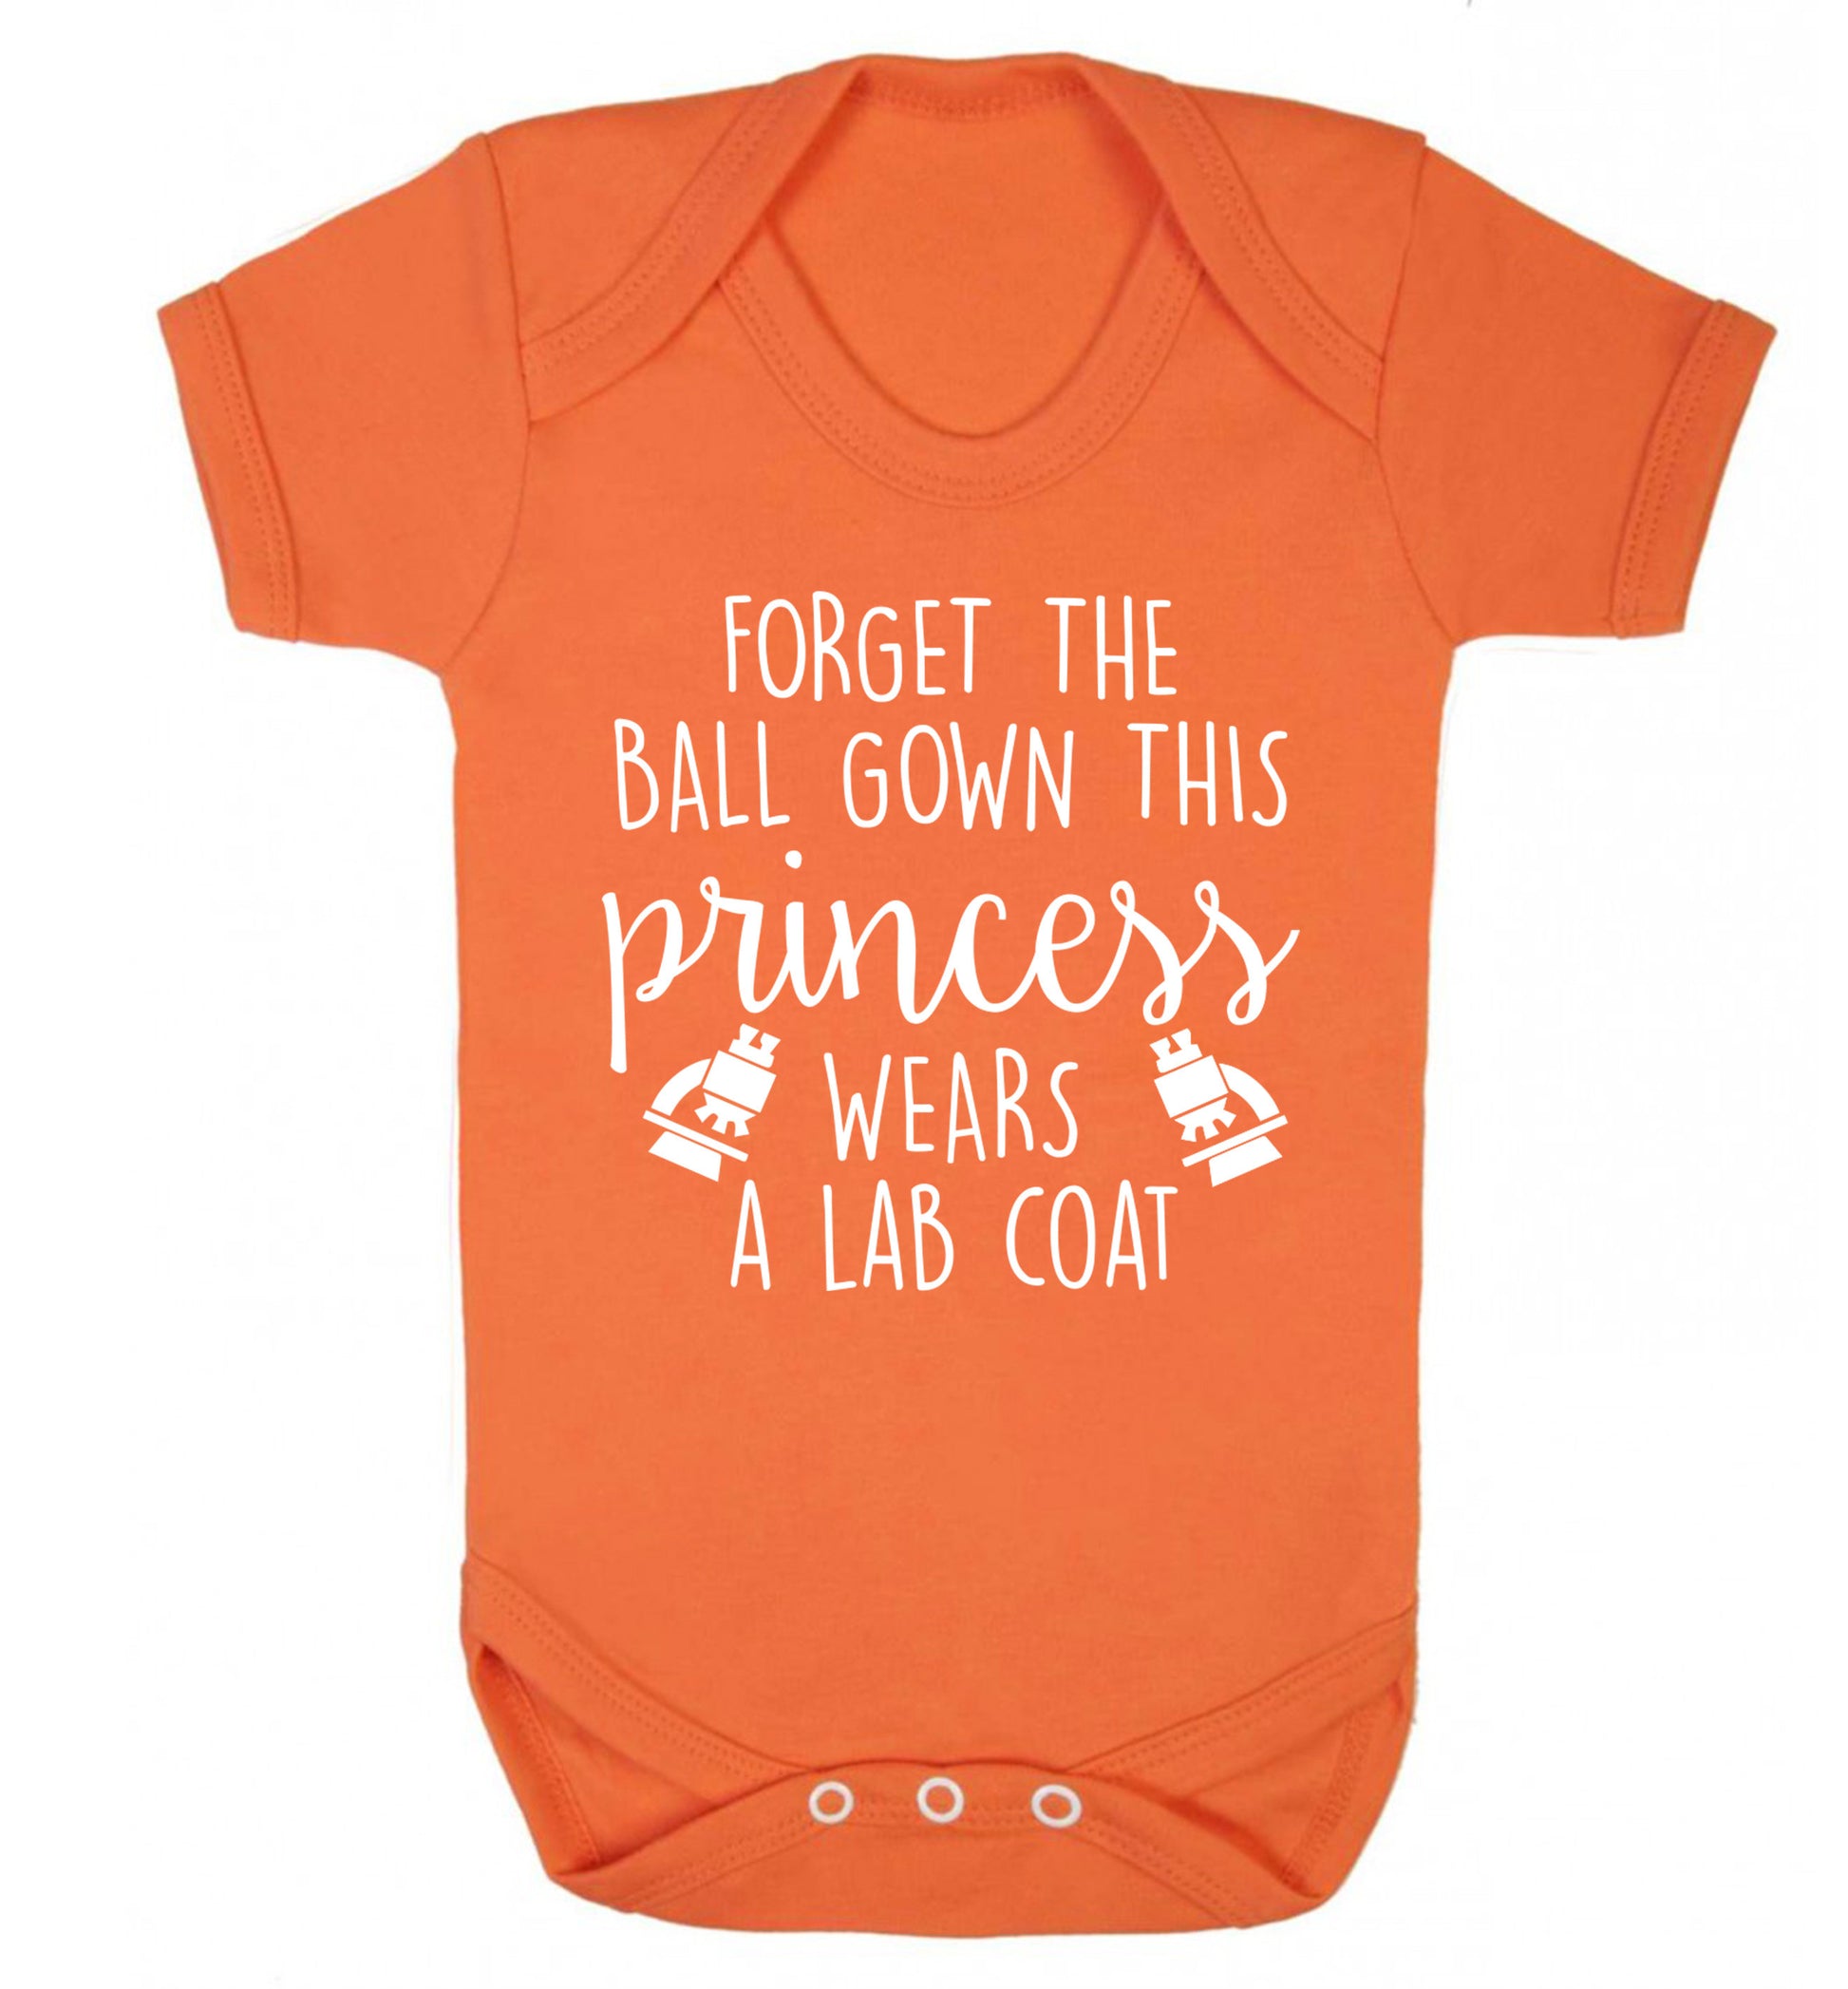 Forget the ball gown this princess wears a lab coat Baby Vest orange 18-24 months